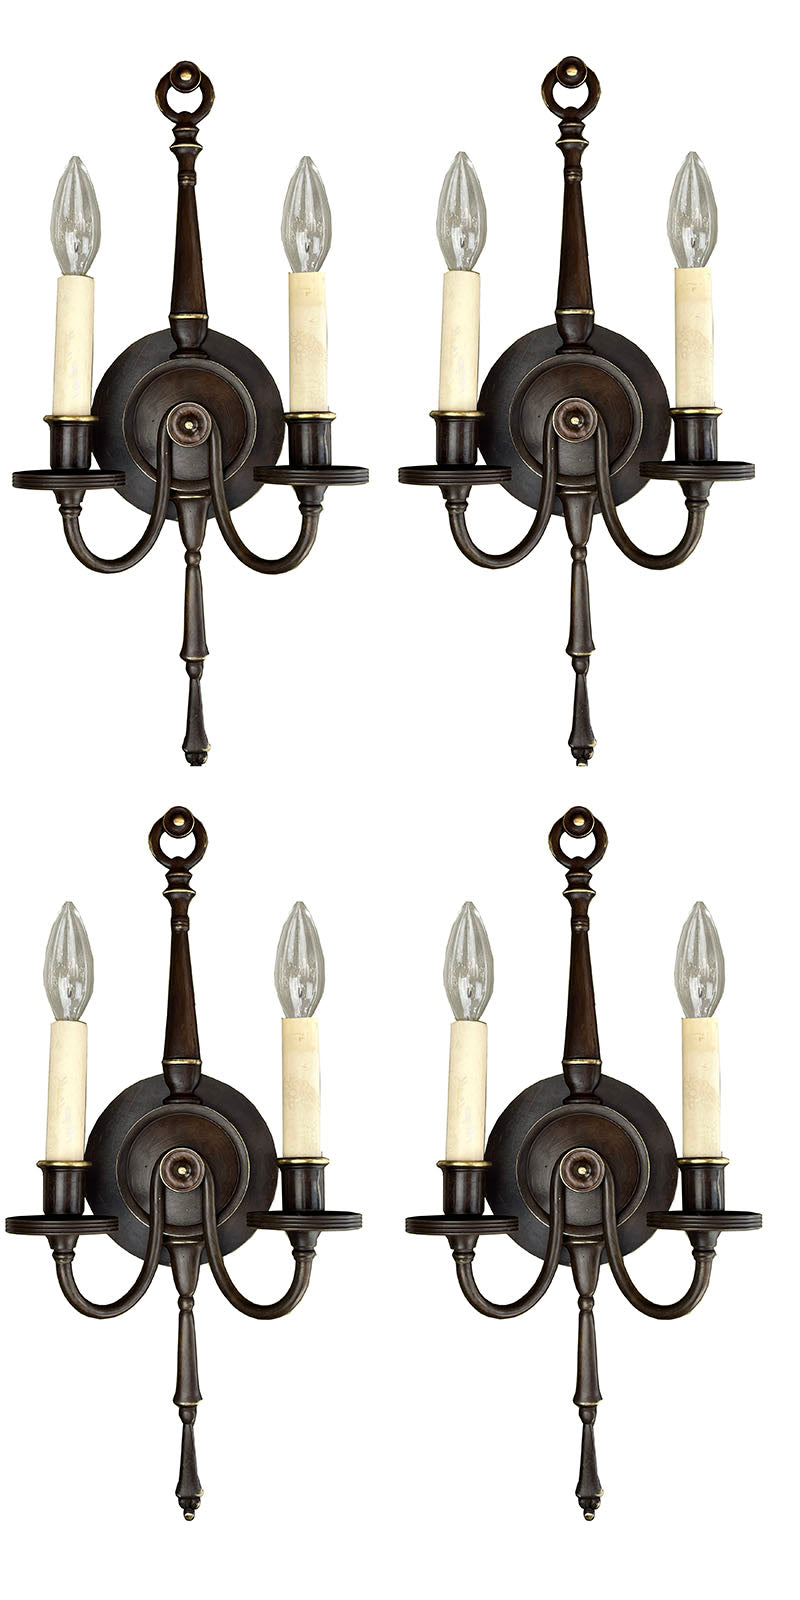 $950 PAIR - SET OF 4 AVAILABLE -  Antique Circa 1910 Georgian / Colonial Revival Elongated Double Light Wall Sconces